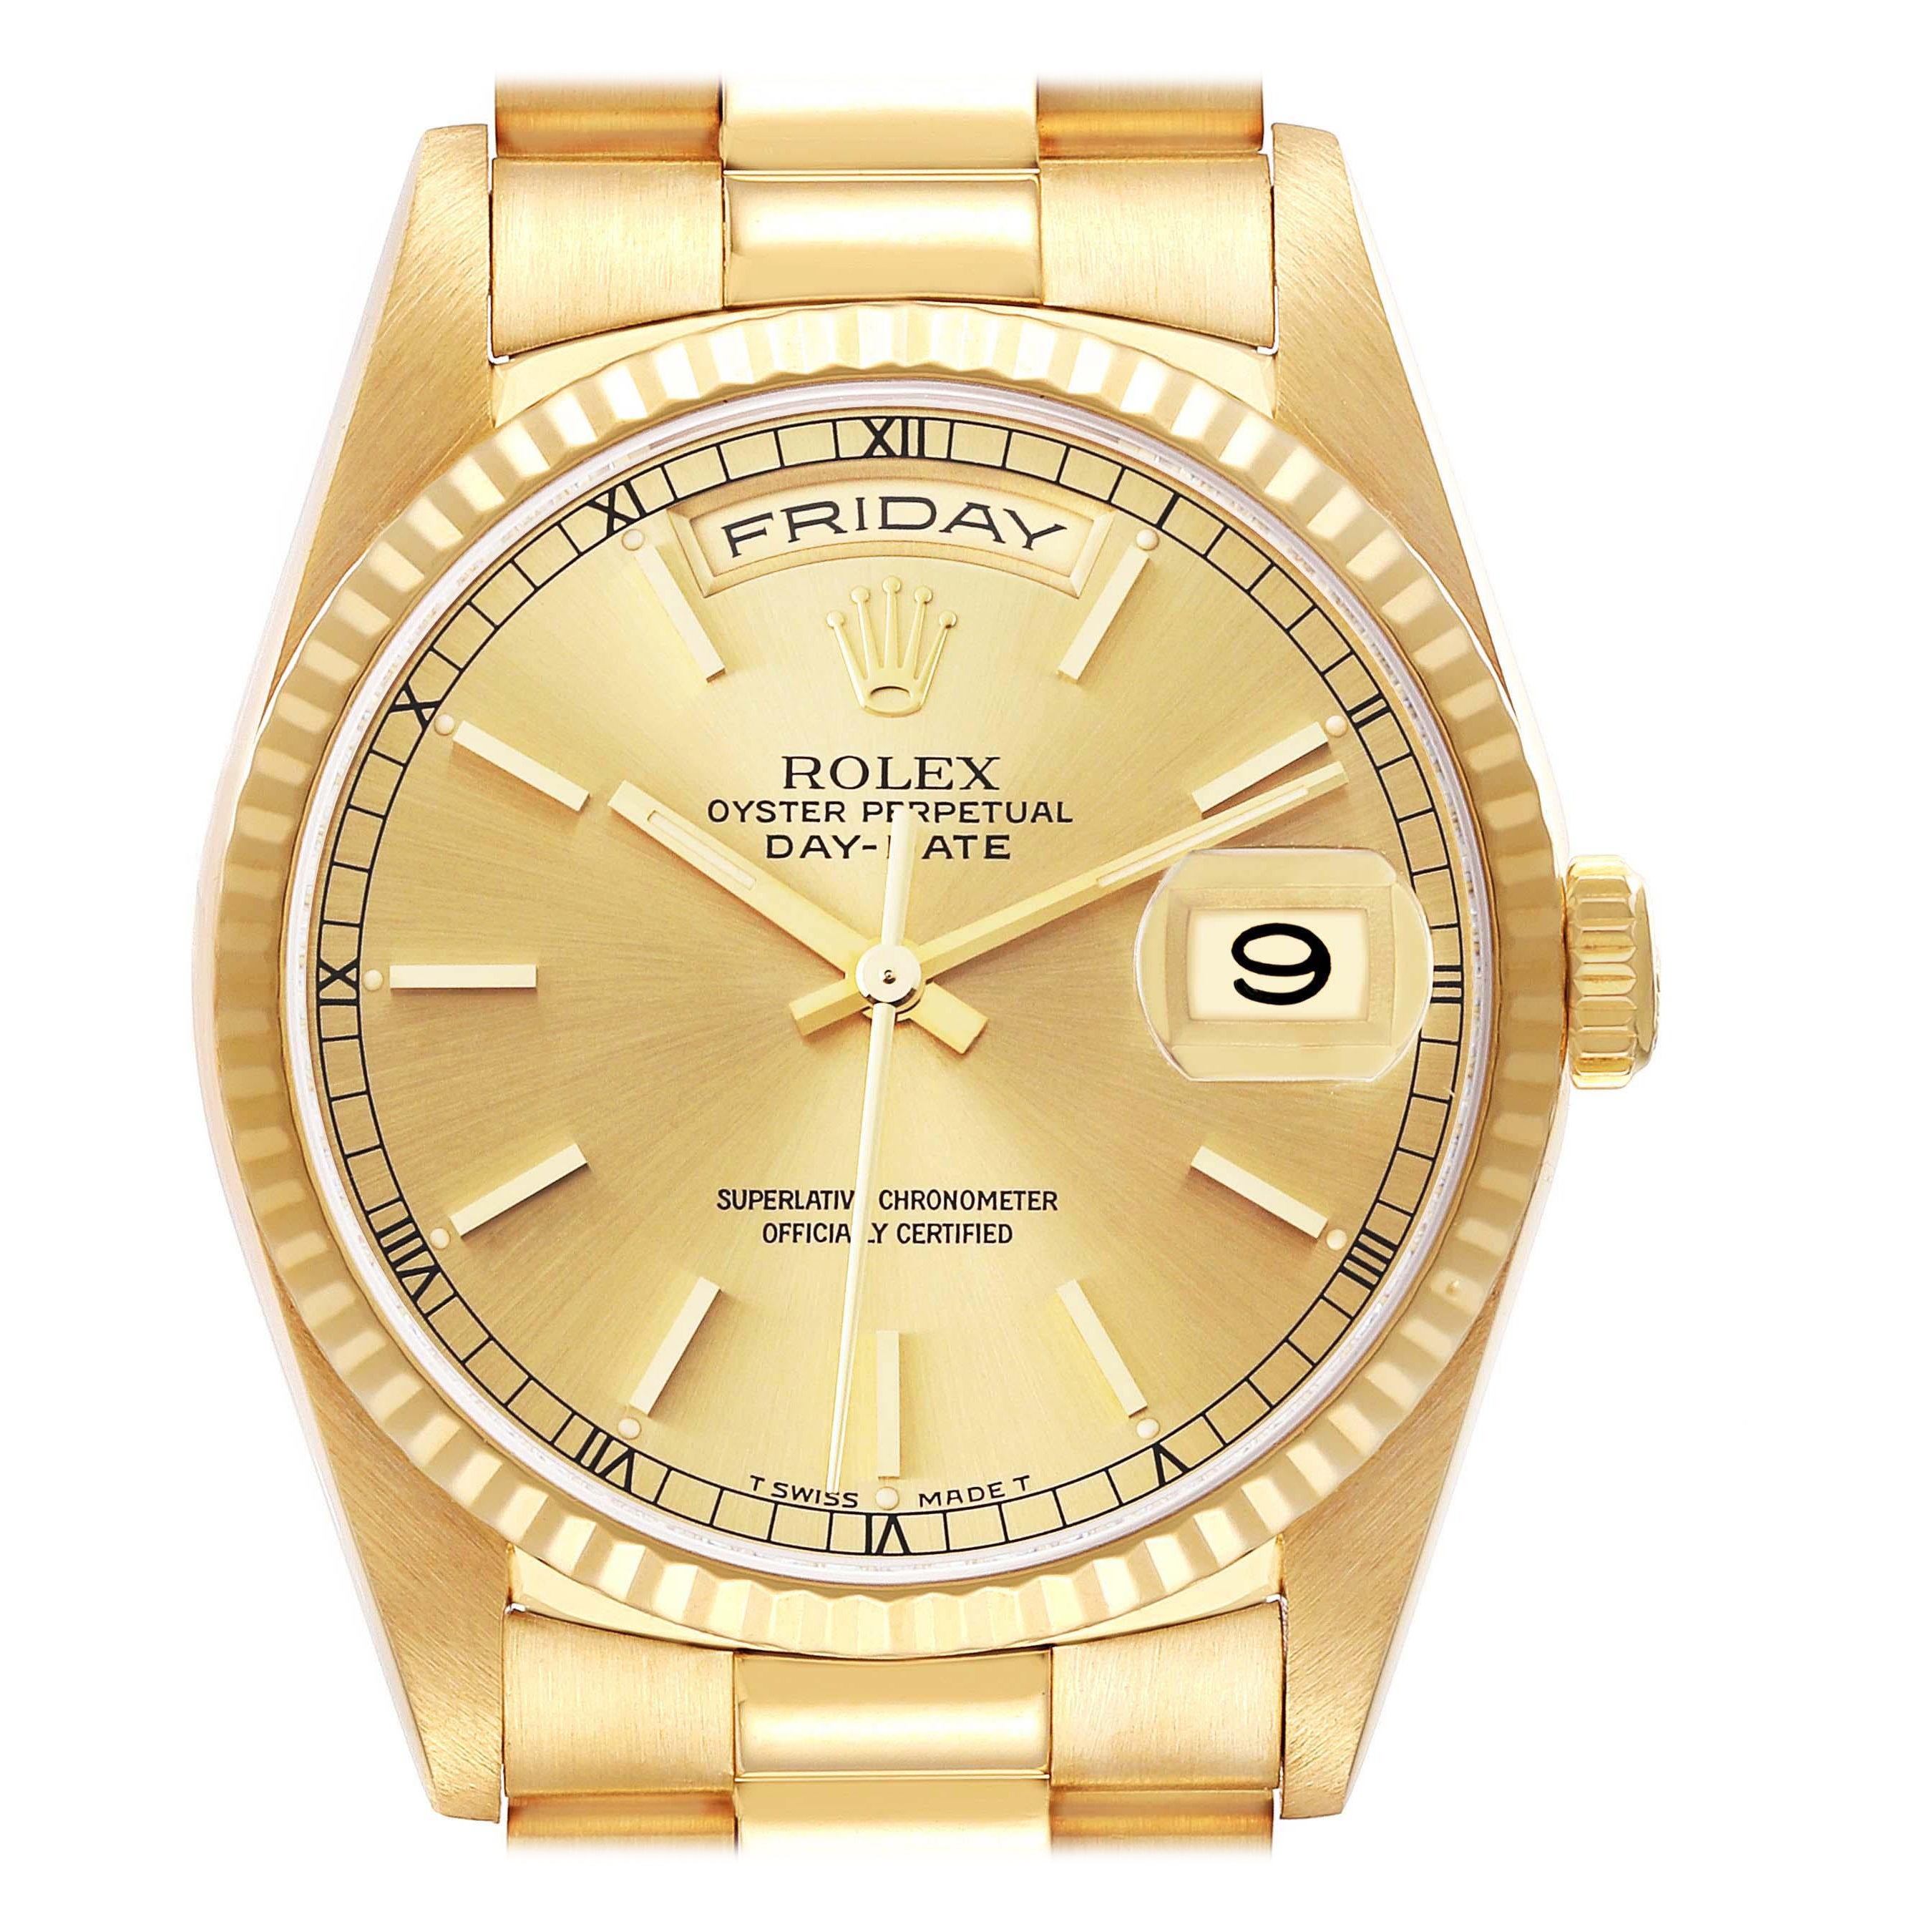 Rolex President Day-Date Yellow Gold Champagne Mens Watch 18238